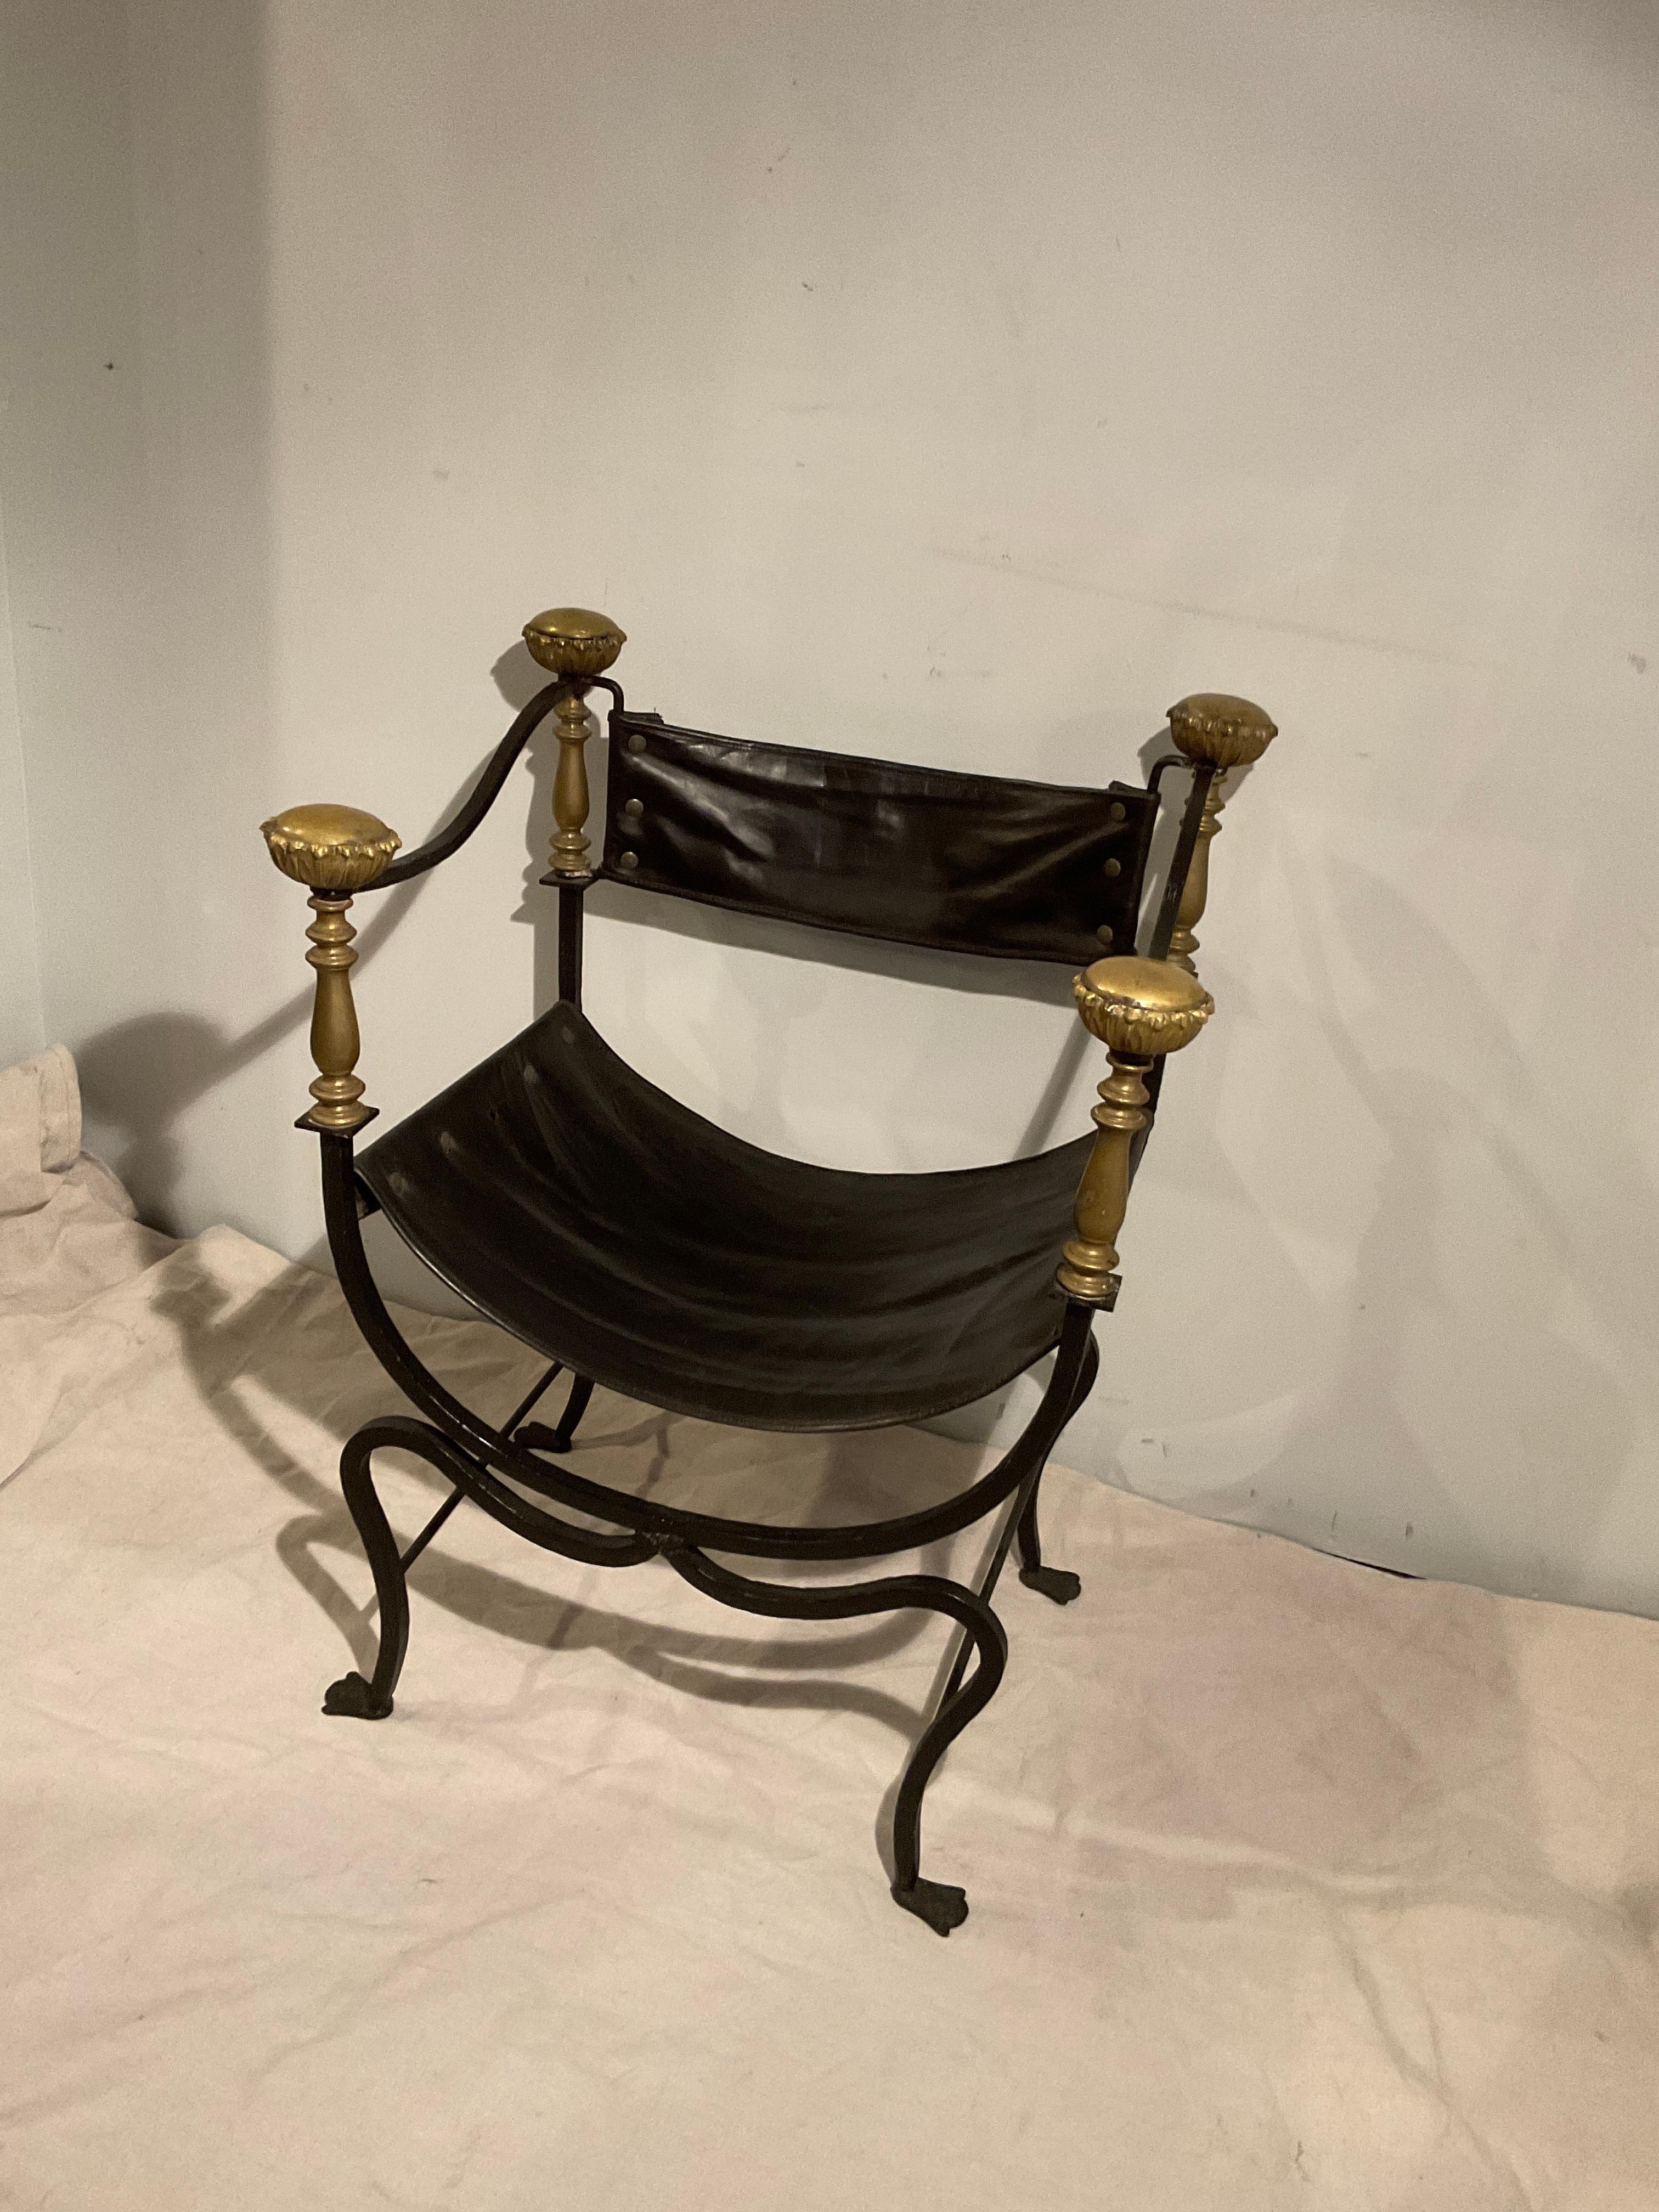 1920s Savonarola chair. Iron and brass. One rivet missing in vinyl upholstery.